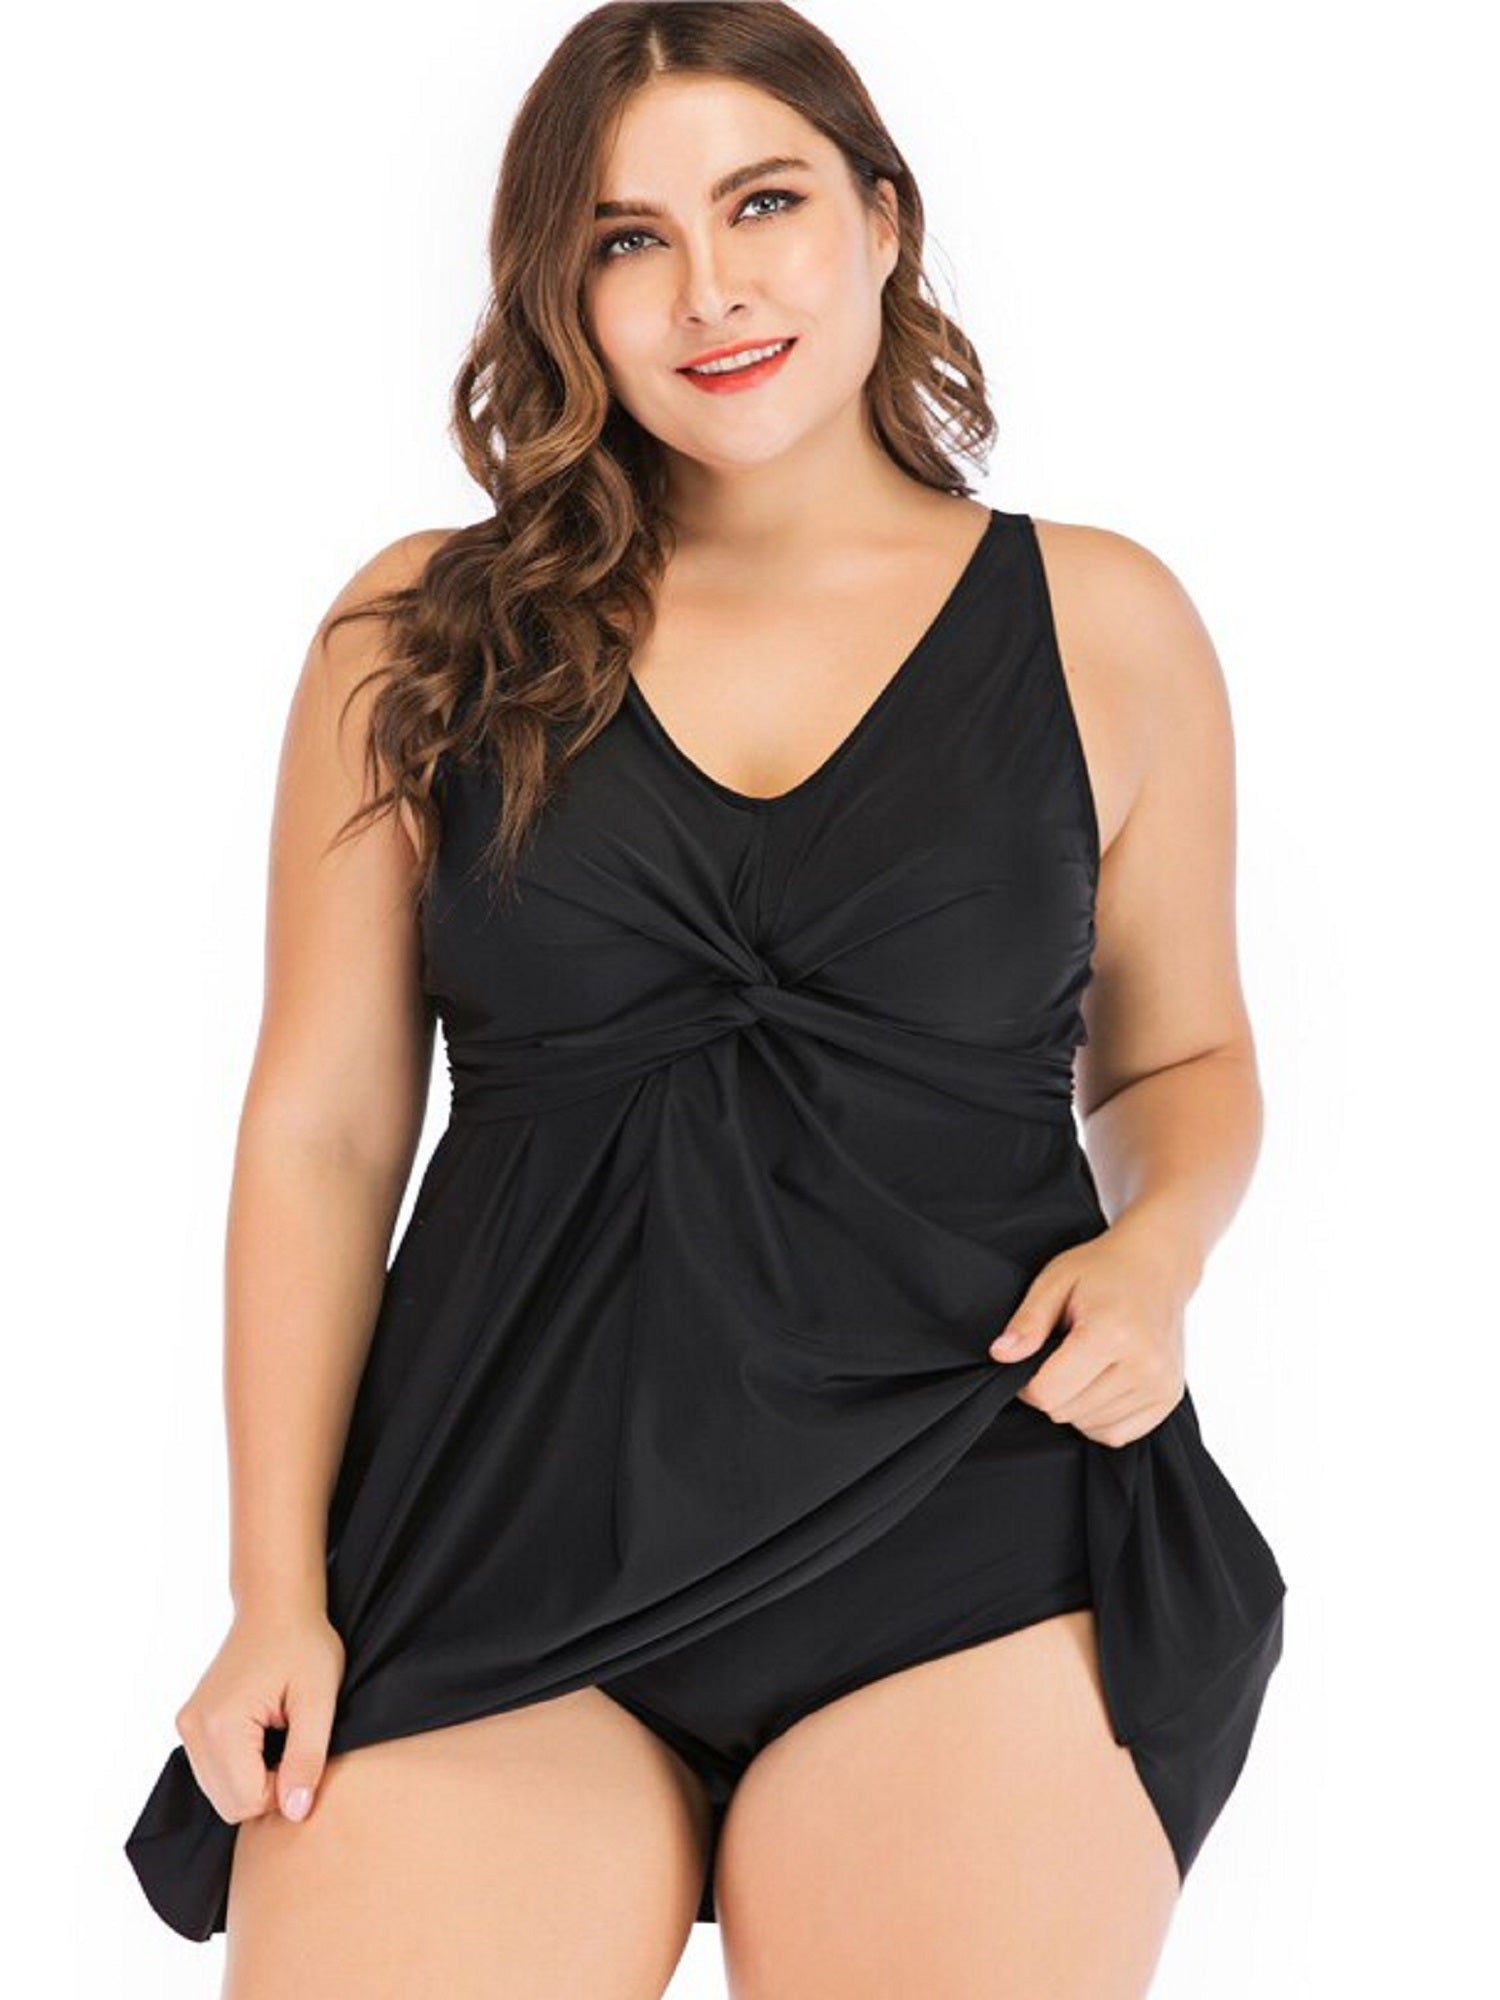 One Piece Swim Dress Costume /Swimsuit with Tummy Control, , Pure Plus Clothing, Lagenlook Clothing, Plus Size Fashion, Over 50 Fashion